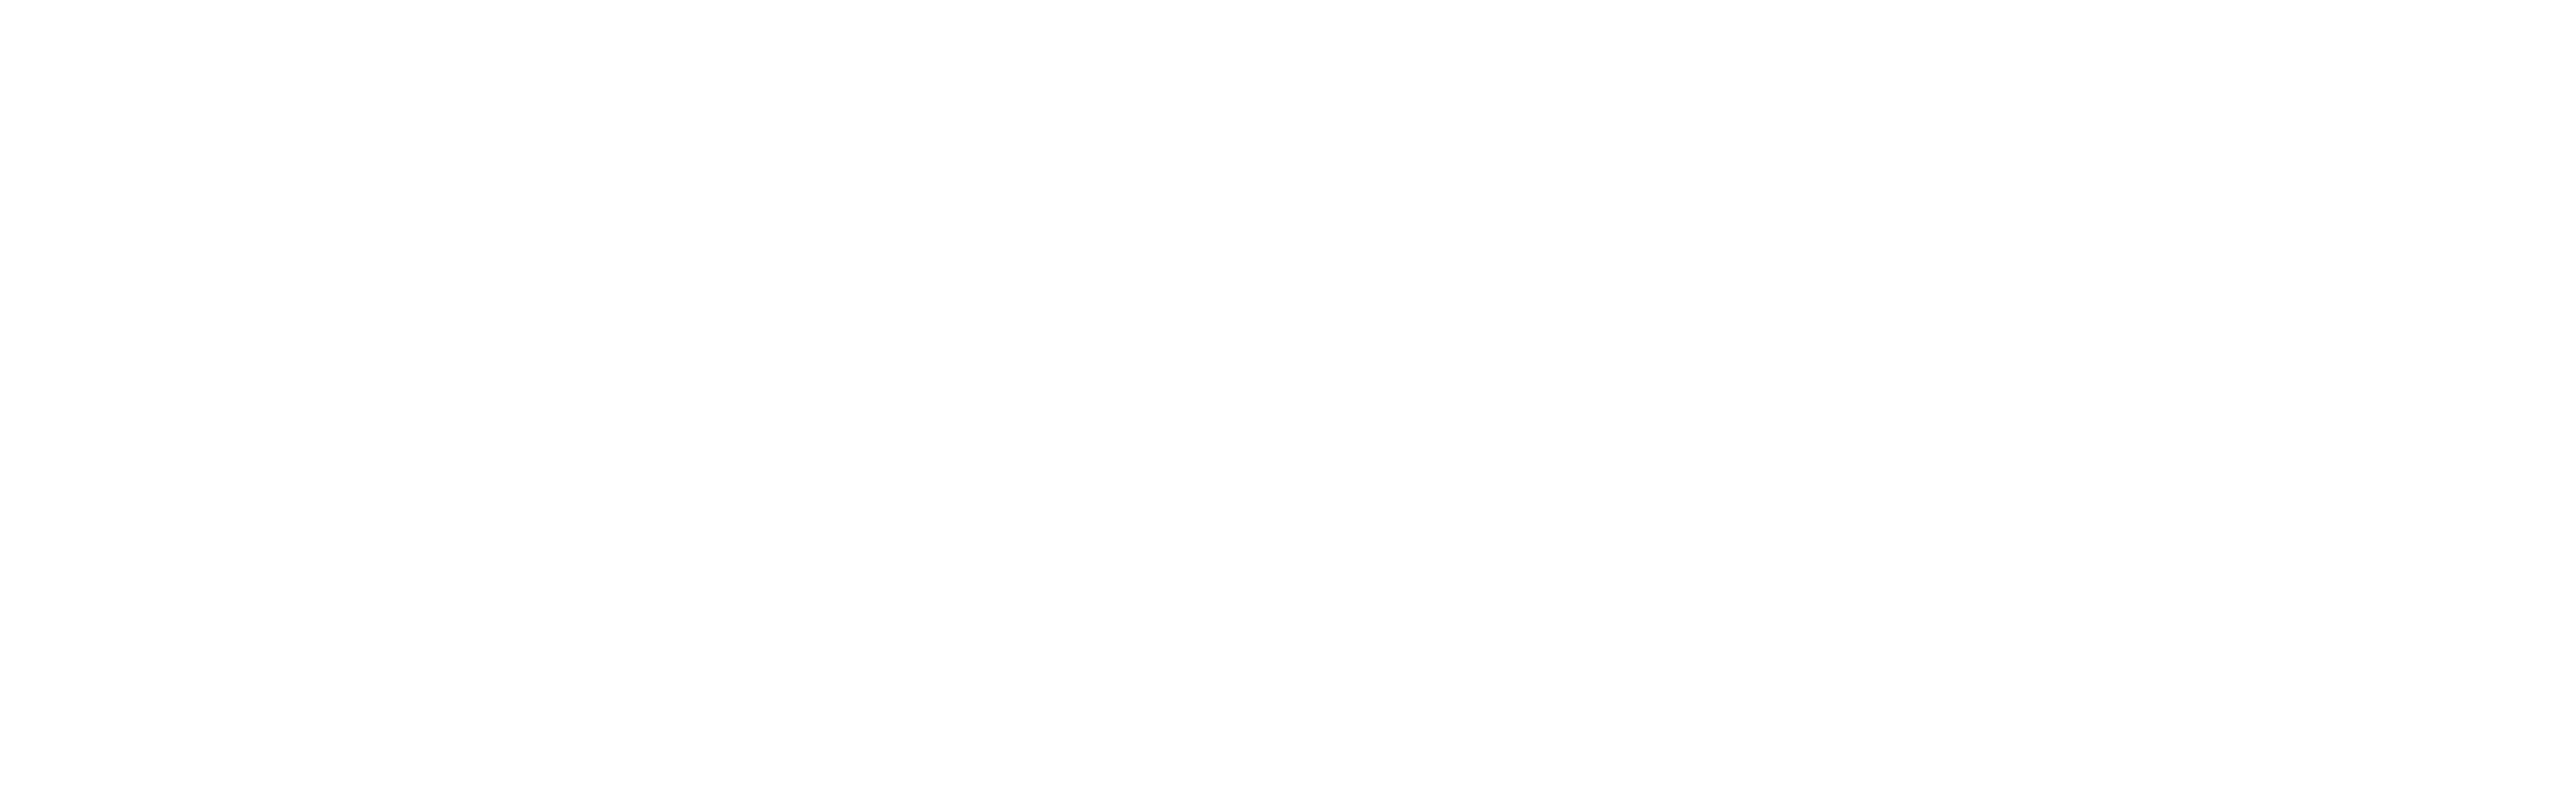 National_Cybersecurity_Alliance_white